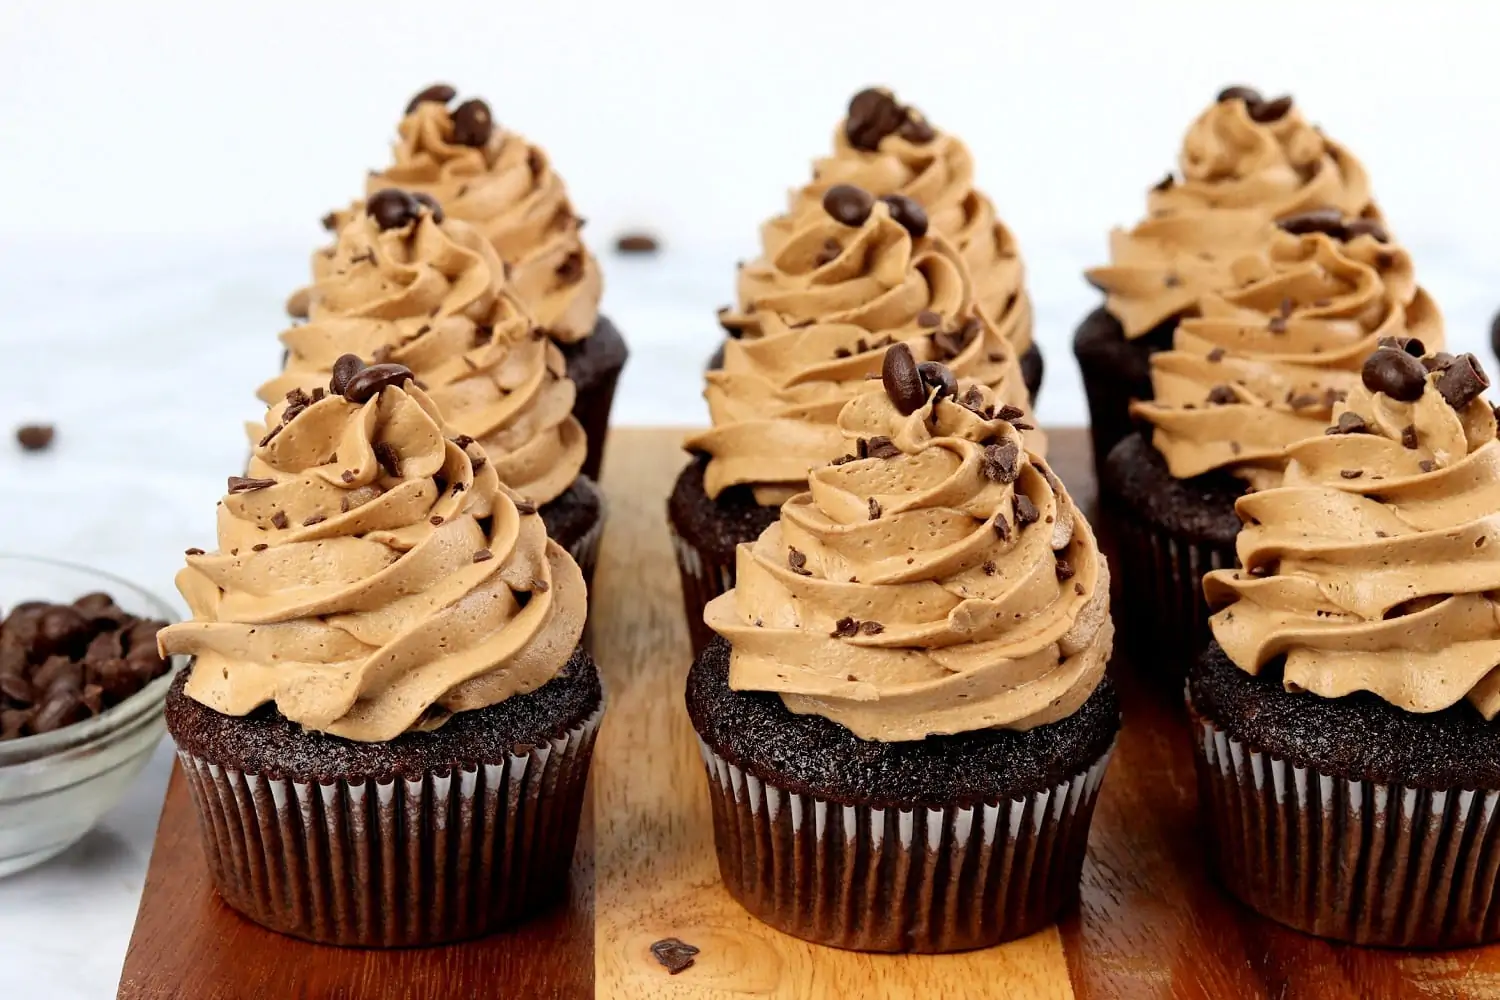 Mocha Cupcakes with Mocha Buttercream Frosting